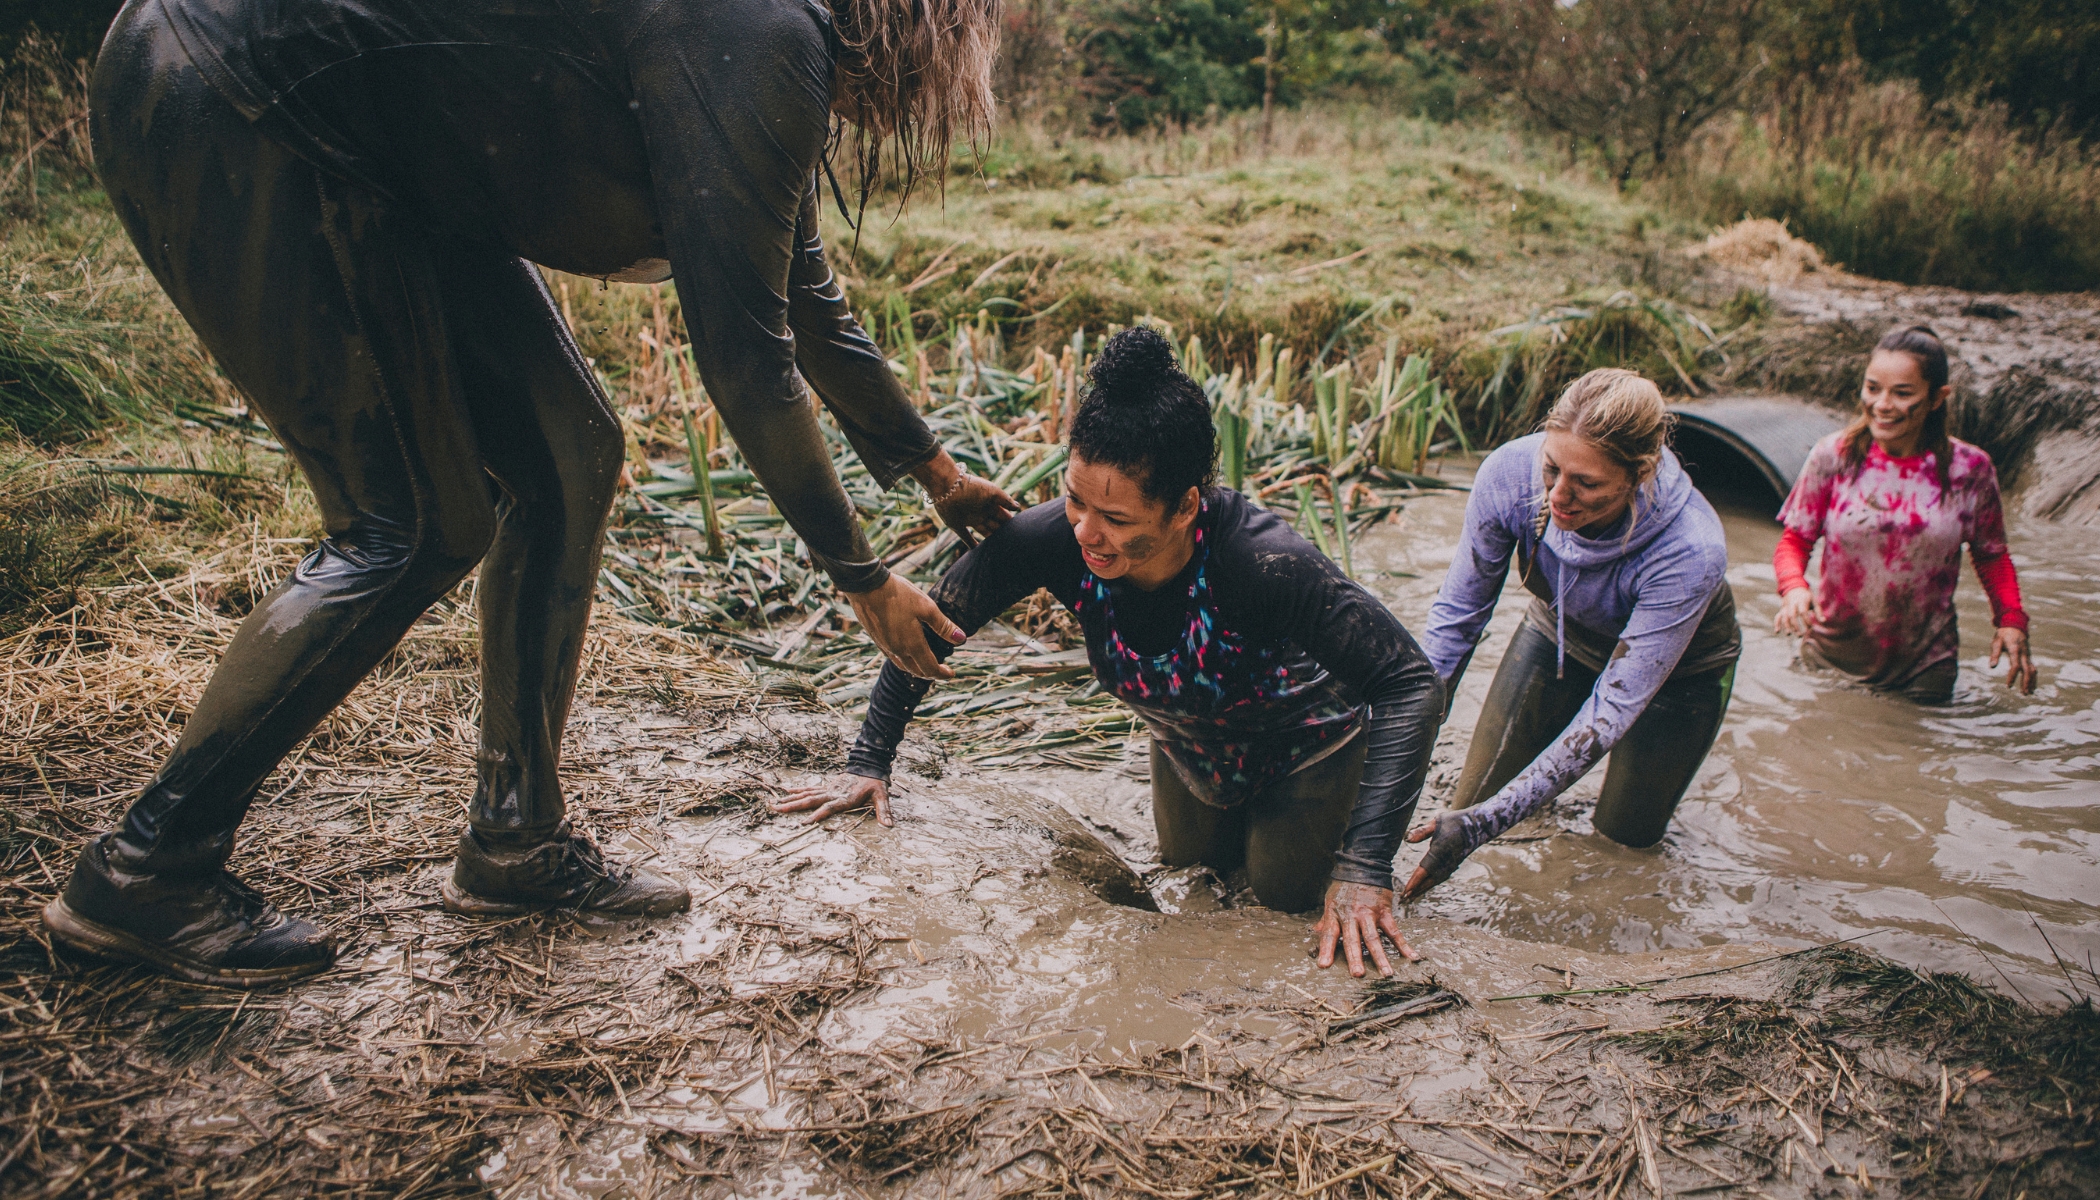 Women climb through mud obstacle at challenge event